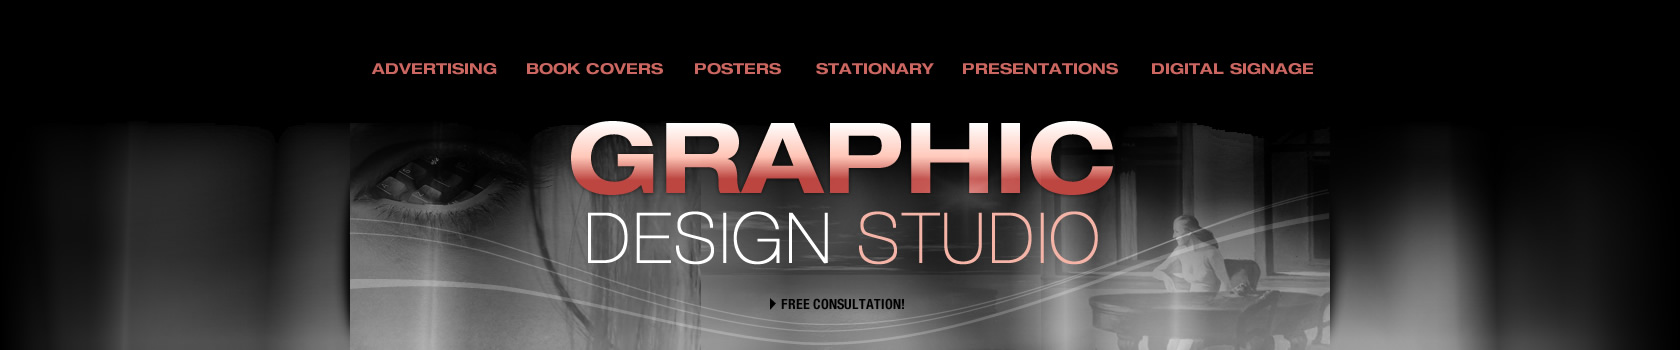 Graphic Design Banners